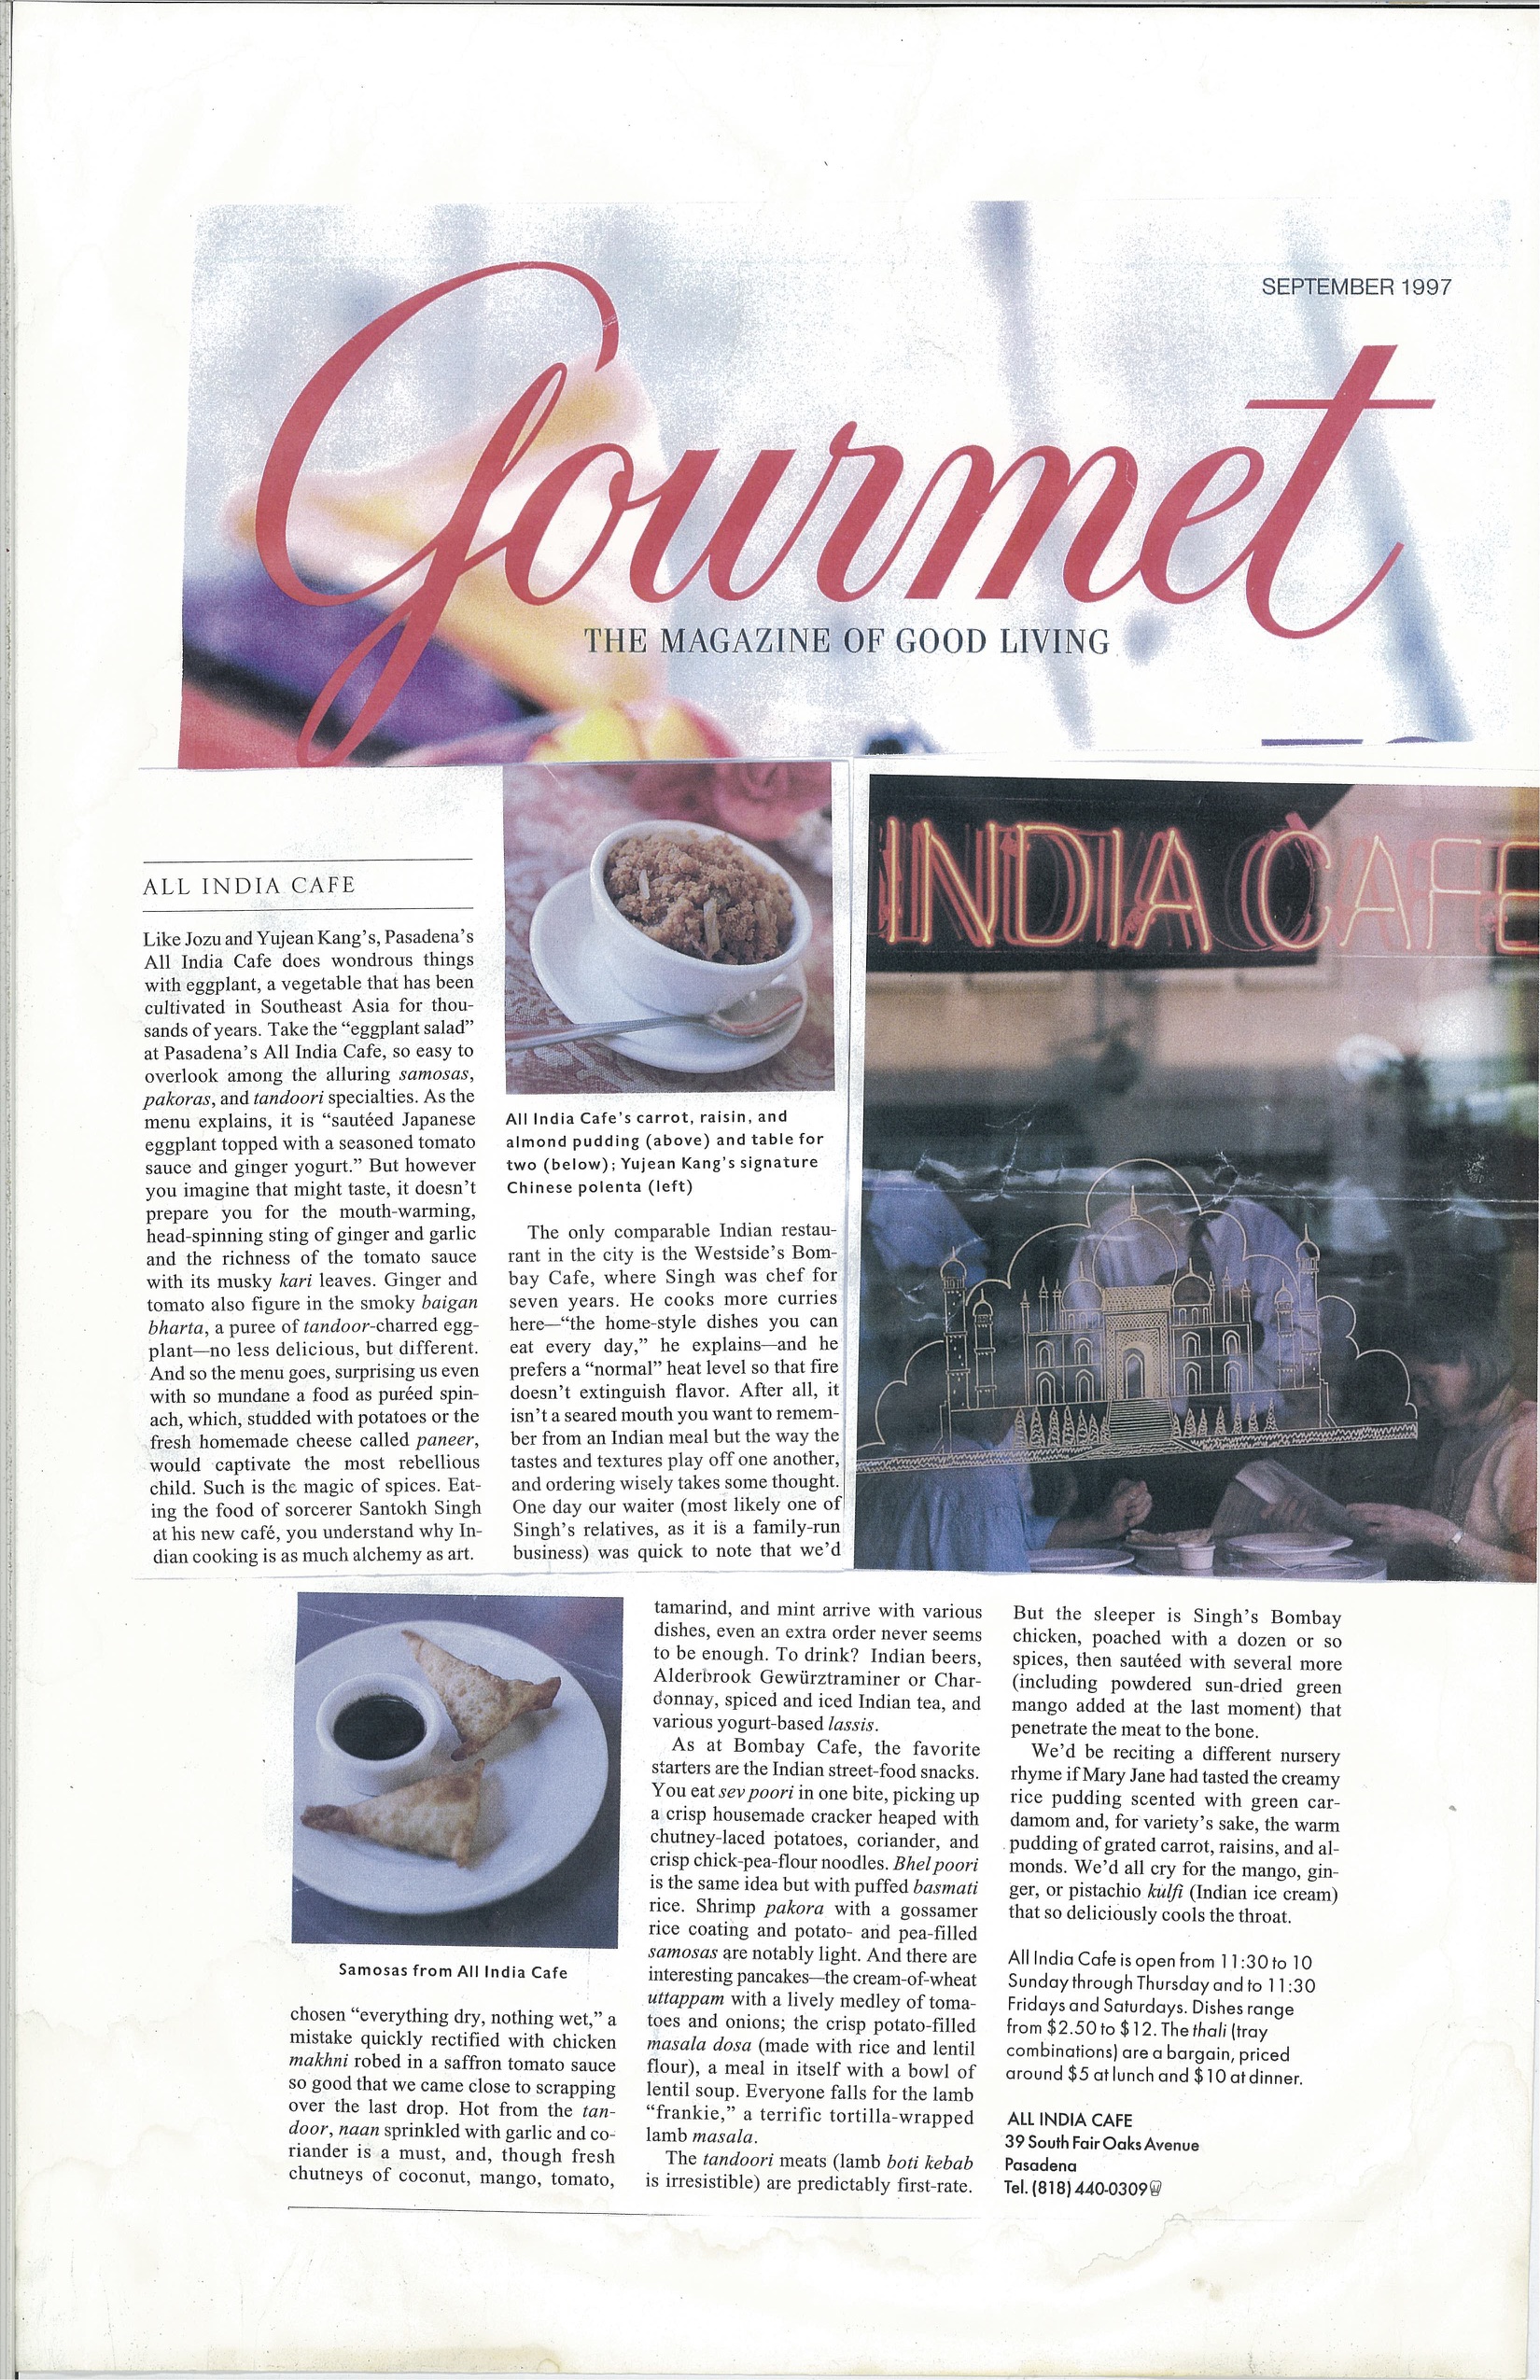  A press clipping of All India Cafe featured in Gourmet Magazine.  